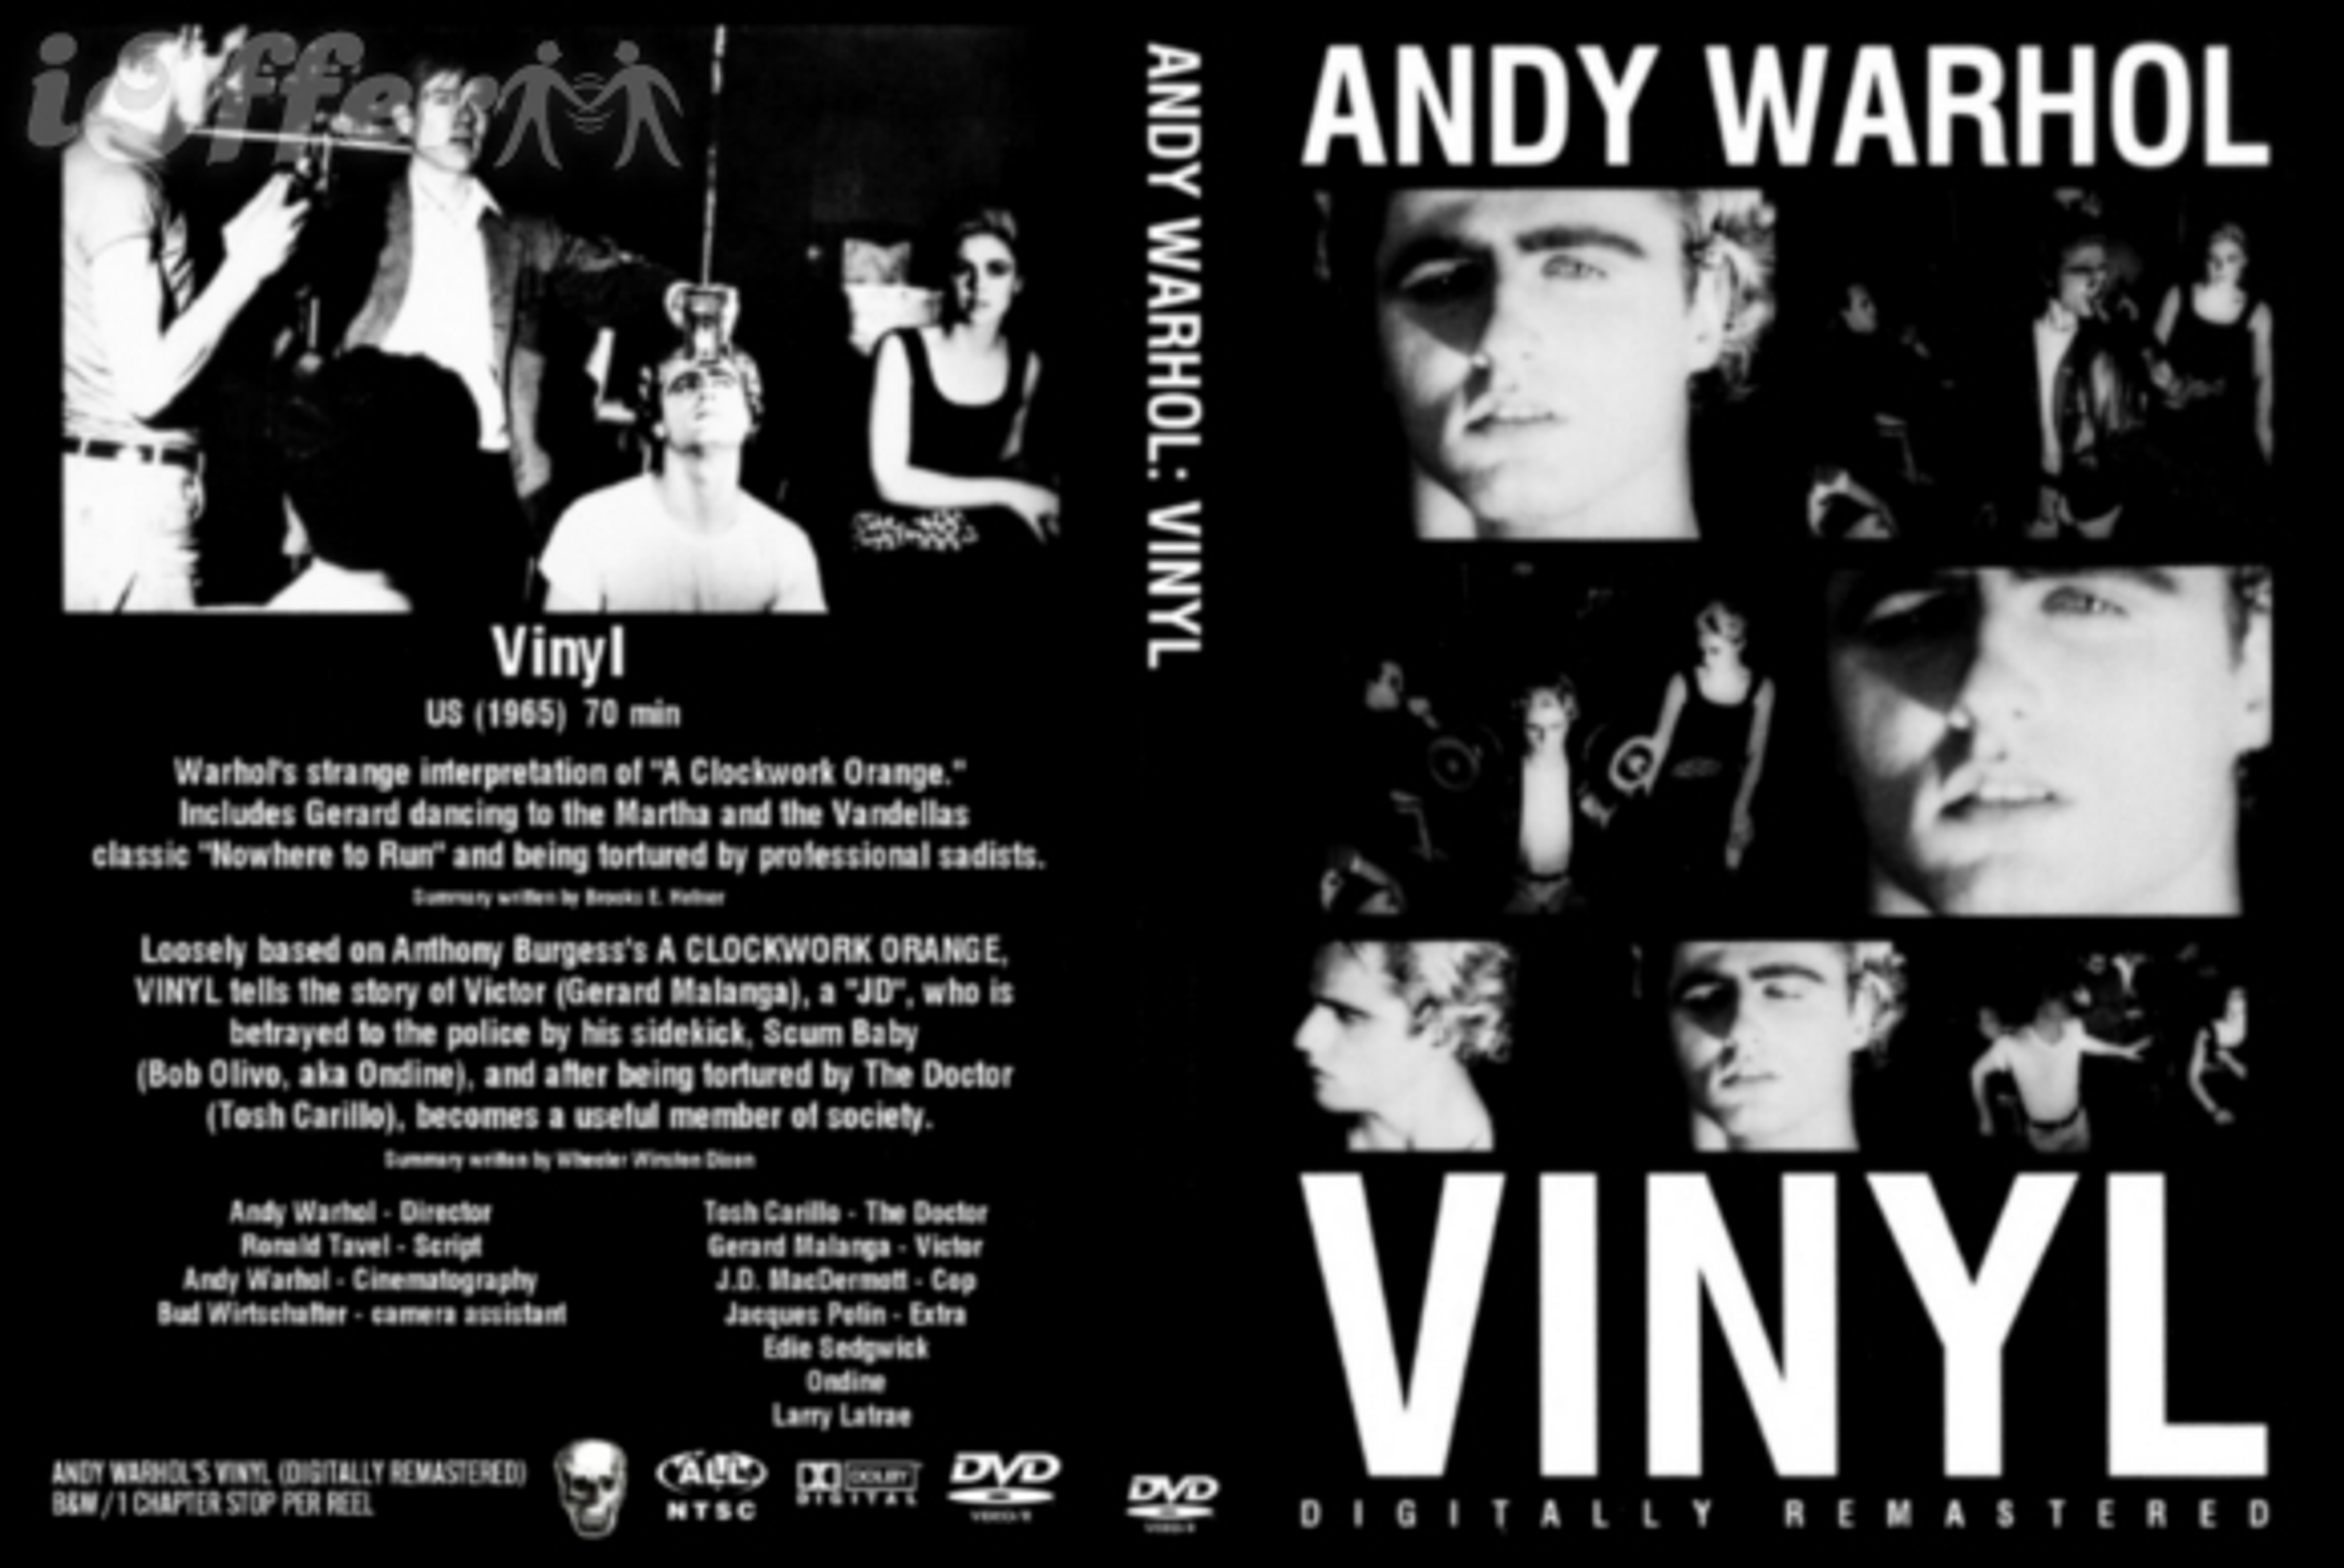 An image of the DVD poster for the movie Vinyl. It shows a collage of monochrome close-up portraits of the protagonists.